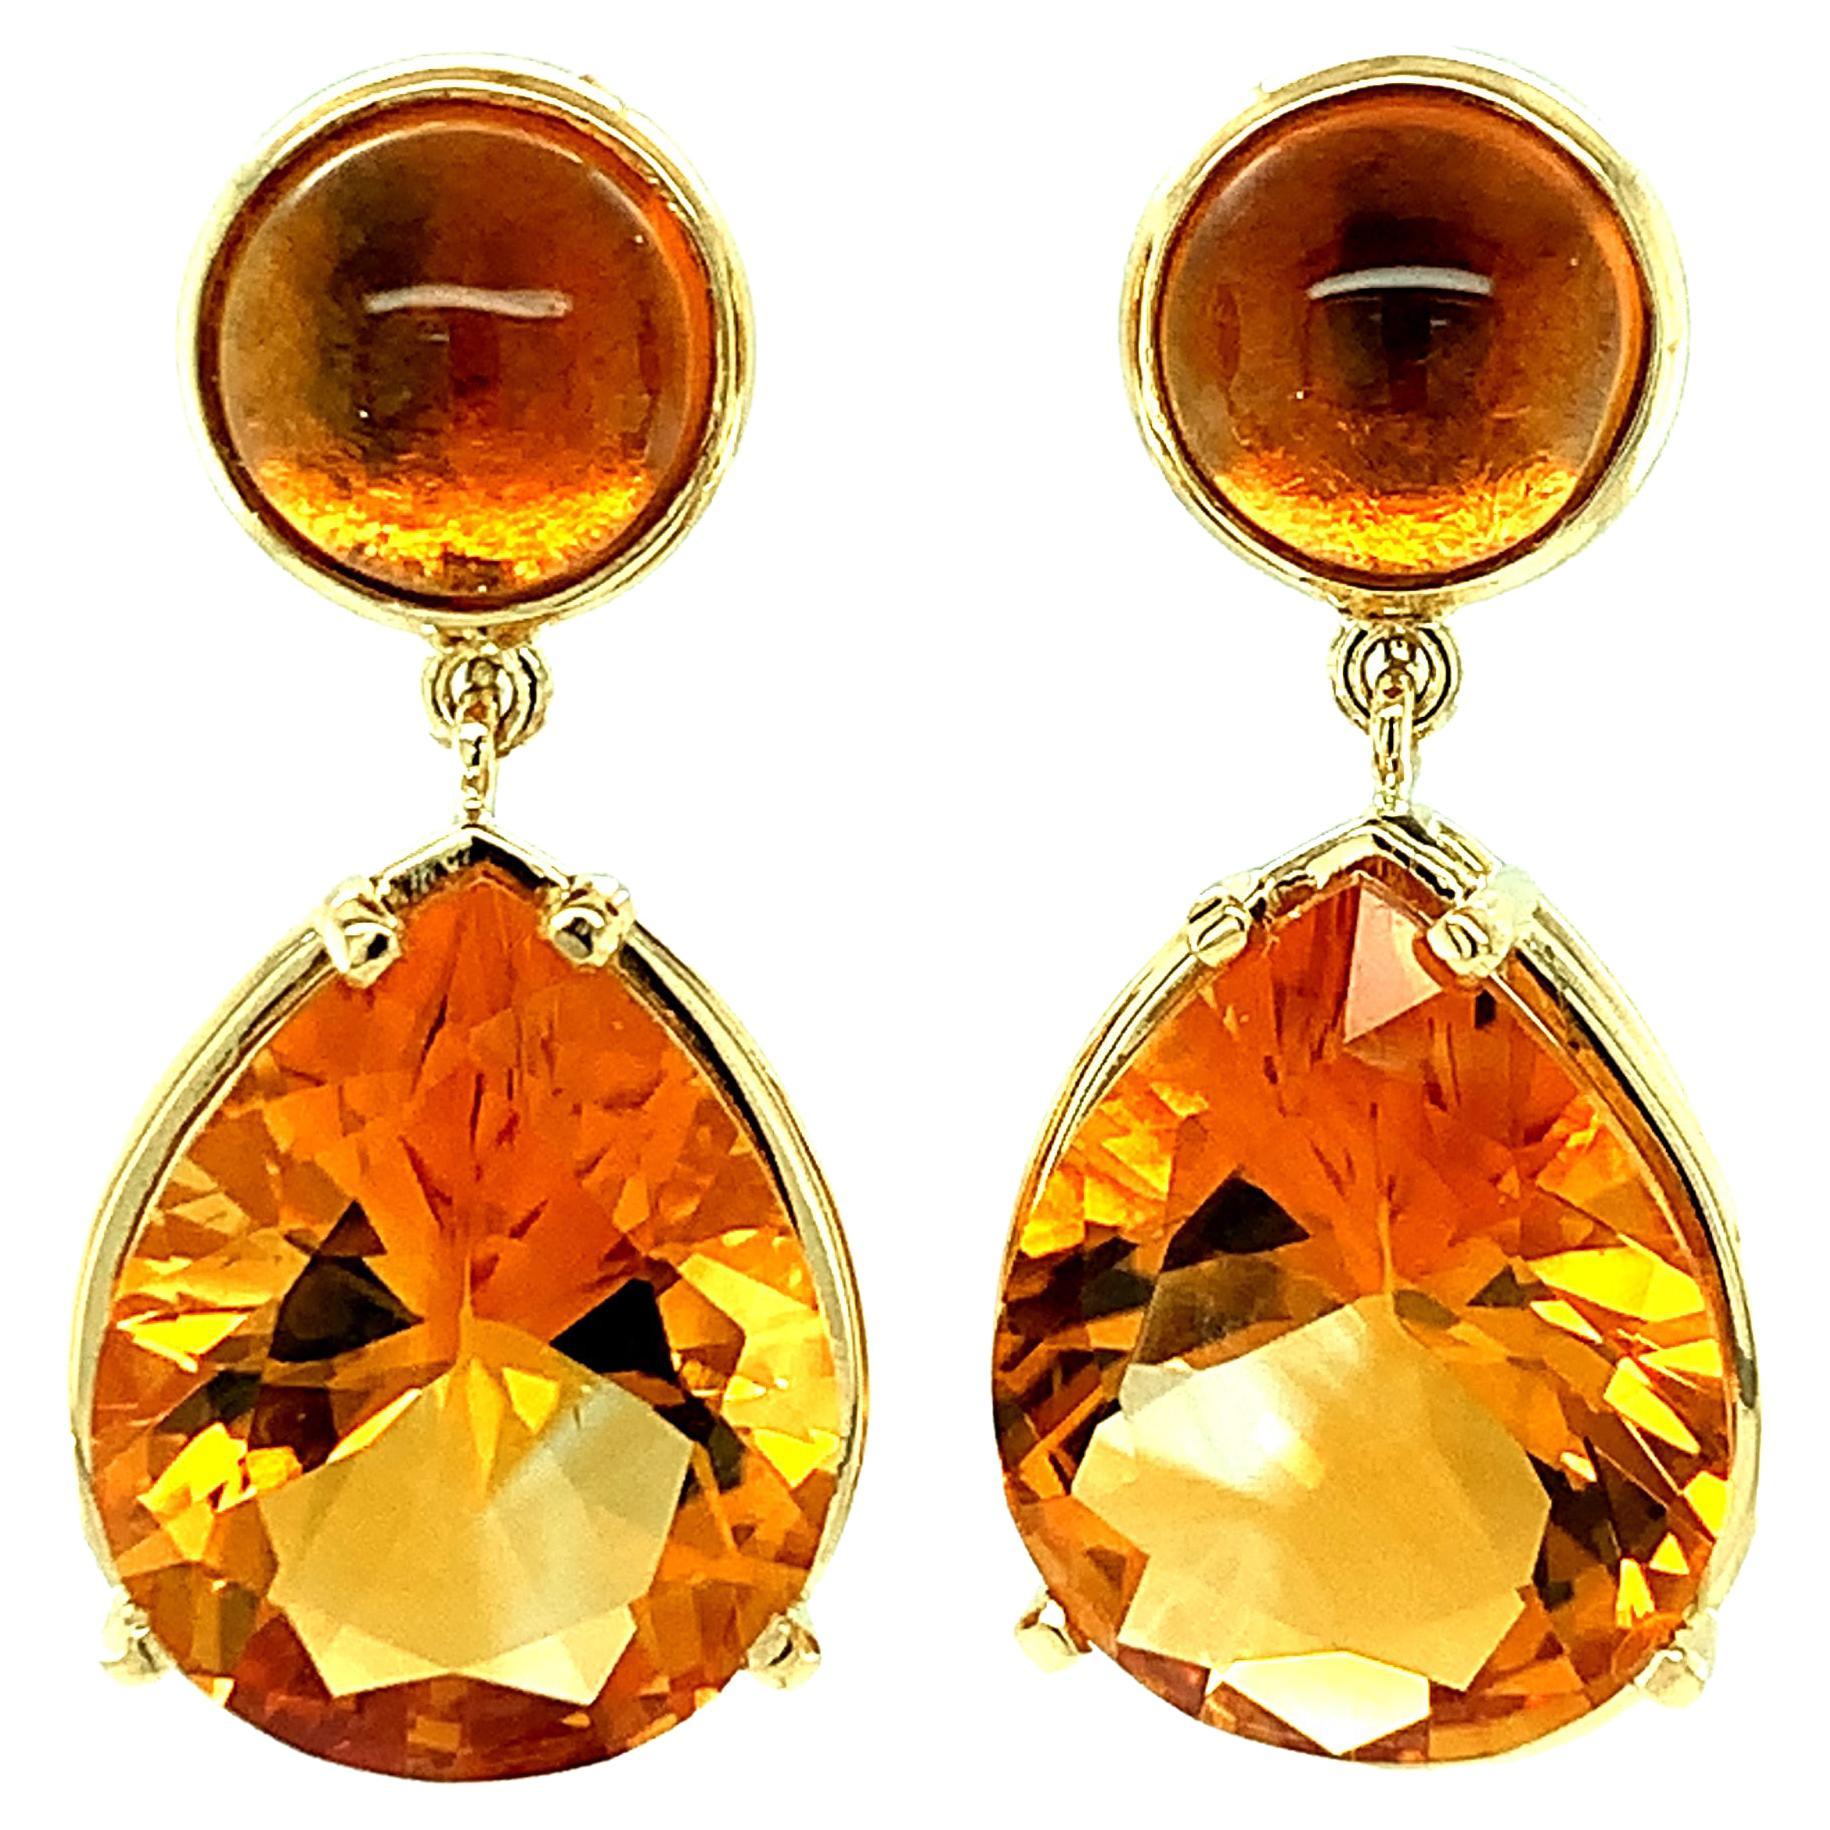 These warm-colored citrine earrings are like giant rays of golden sunshine! Round cabochon citrines with gorgeous deep amber color are bezel set in 18k yellow gold and sit comfortably on the ear lobe, while large, faceted pear-shaped citrines dangle